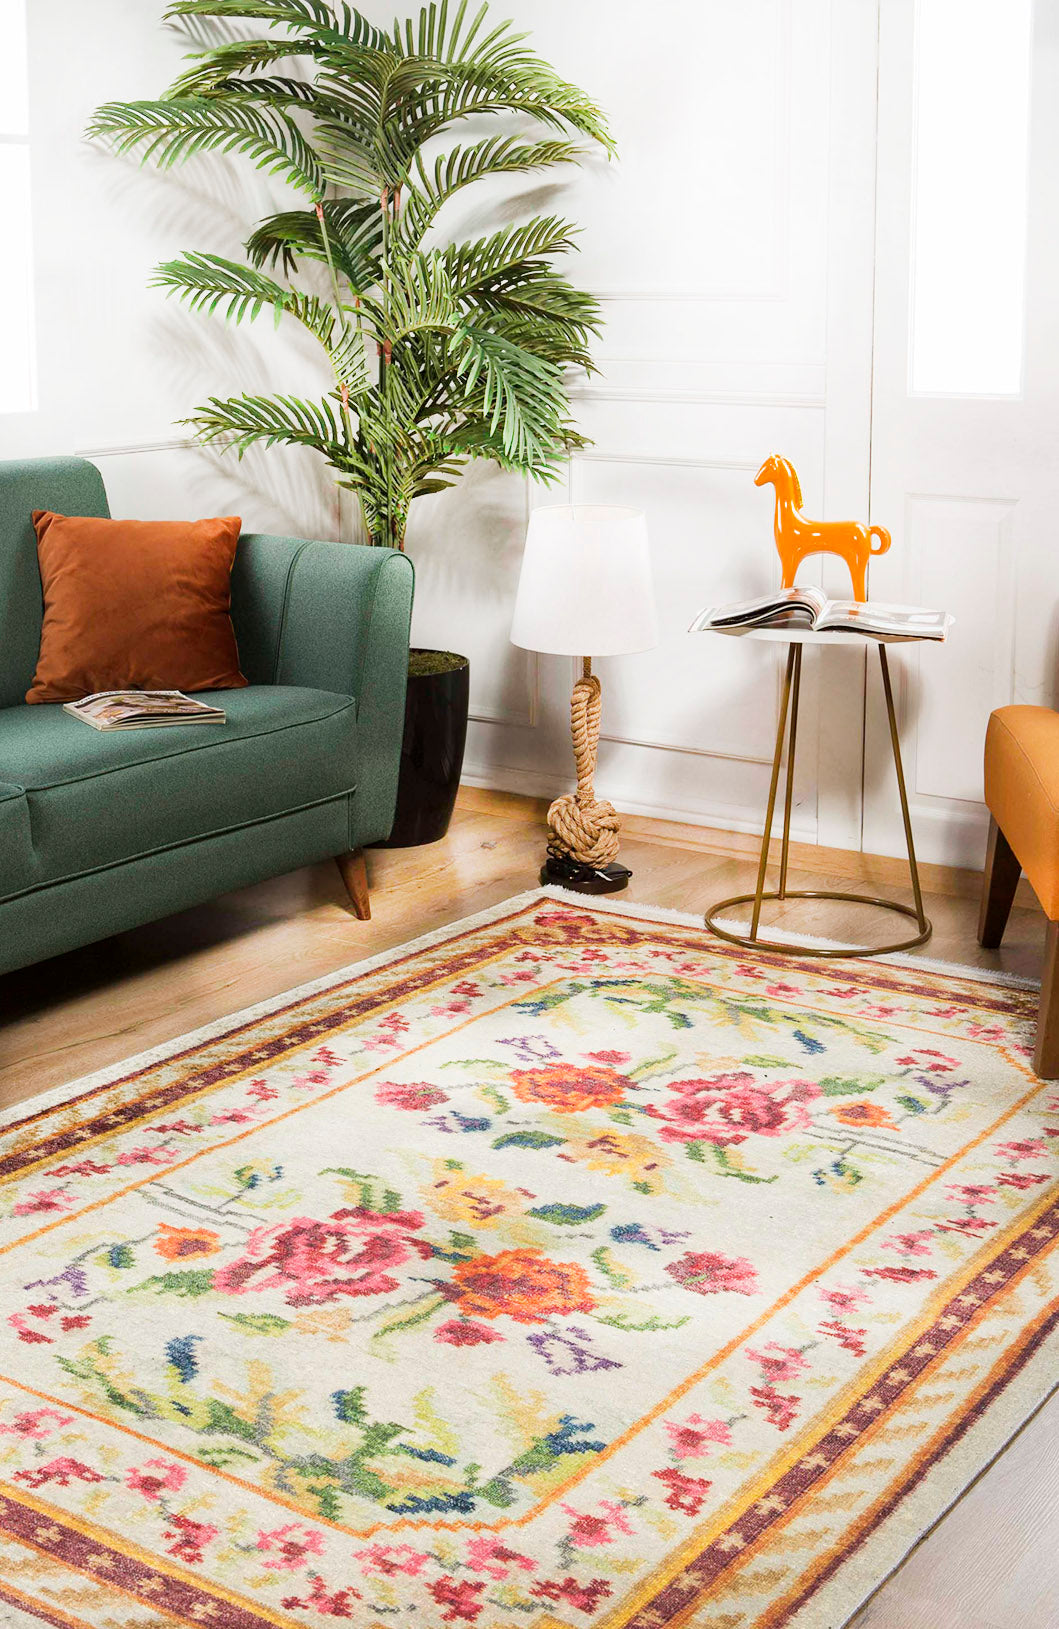 Washable Floral Rugs &Runners